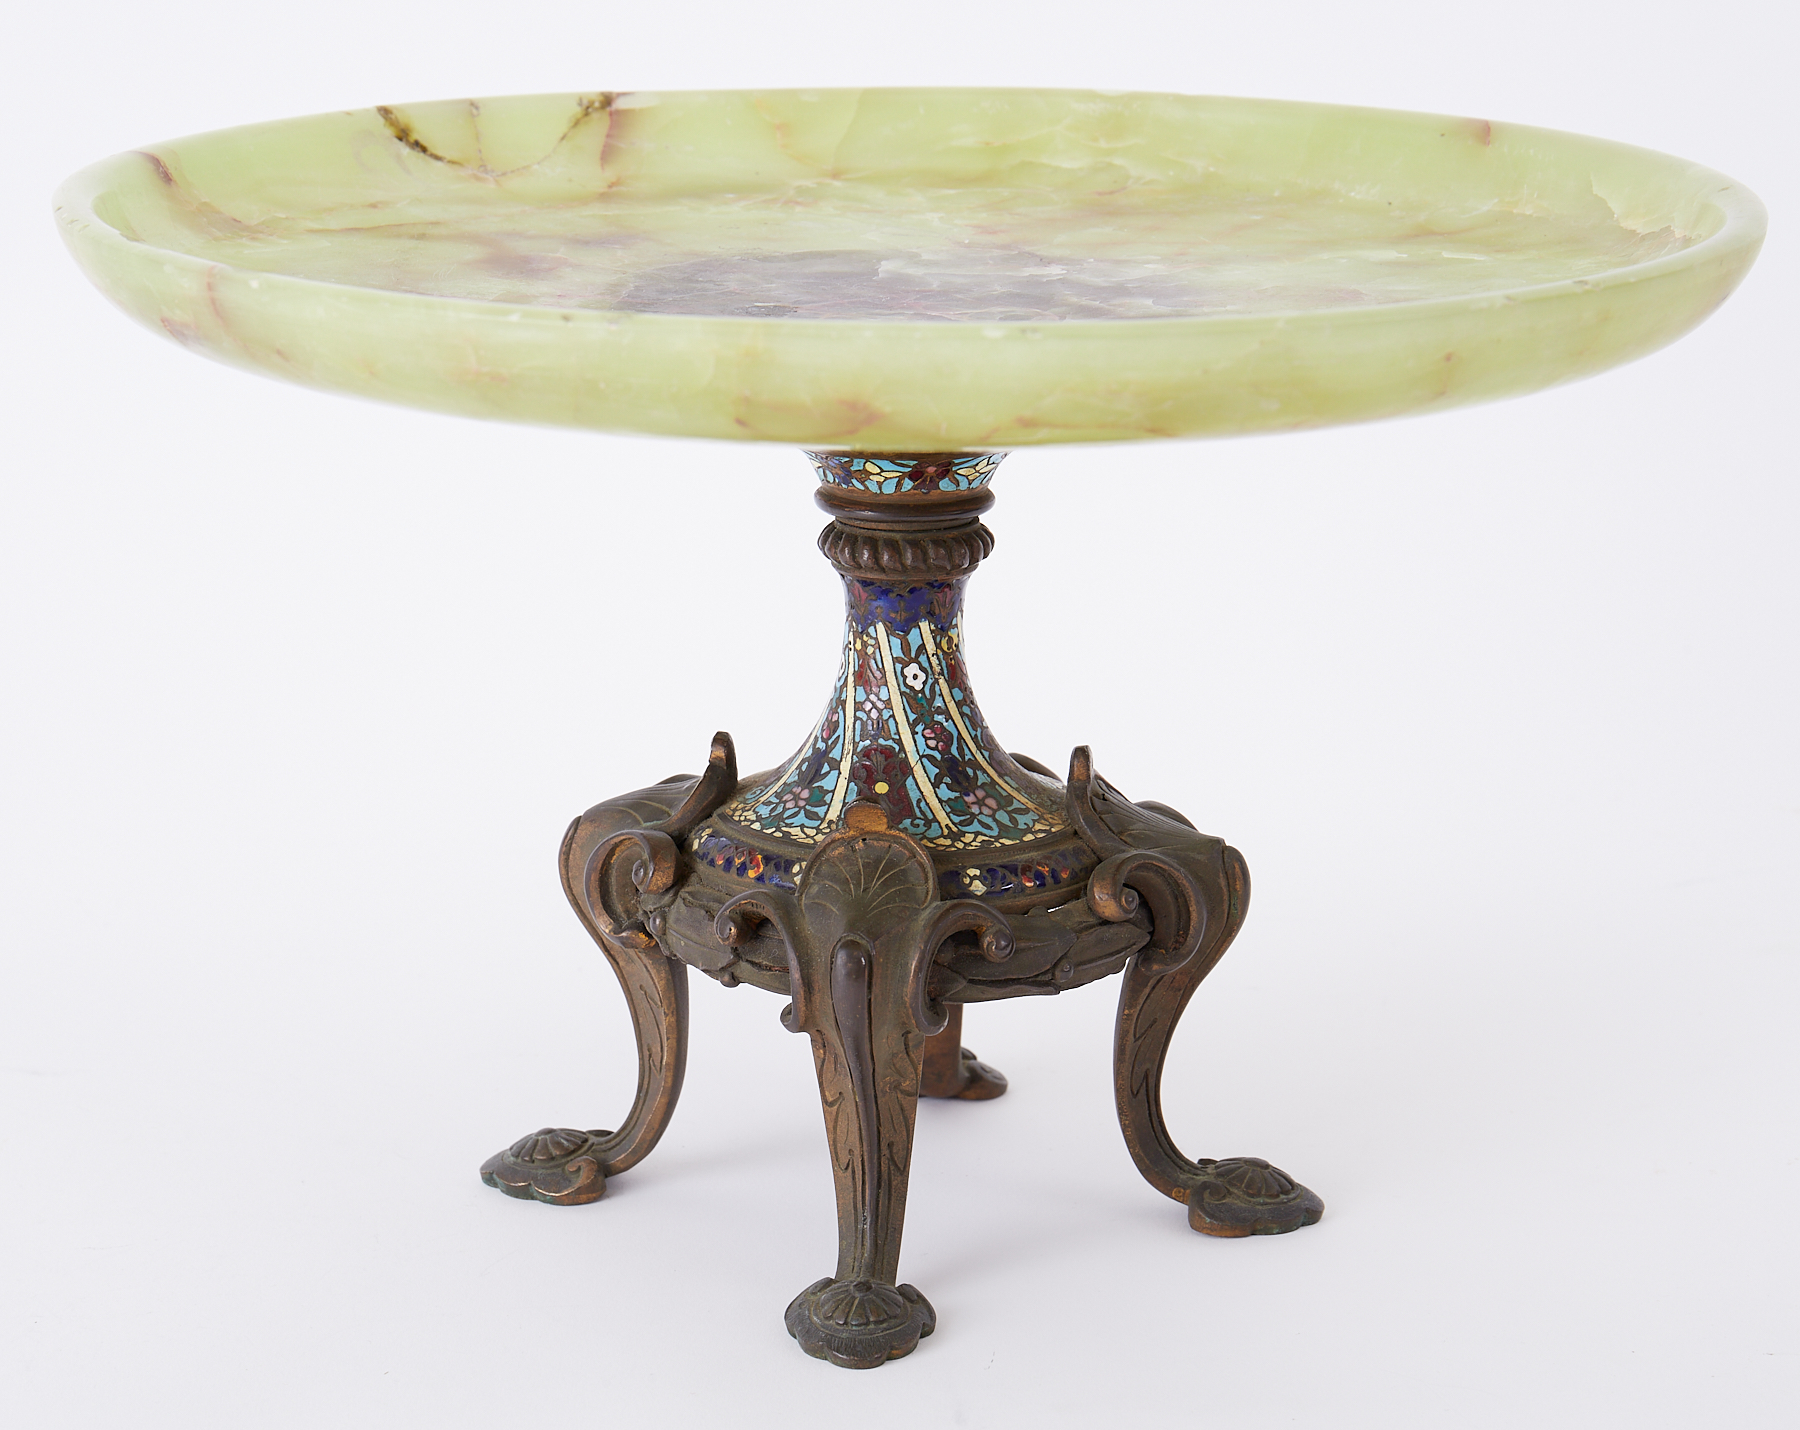 A 19th century French cloisonné enamelled and green marble (onyx) comport / tazza on pedestal